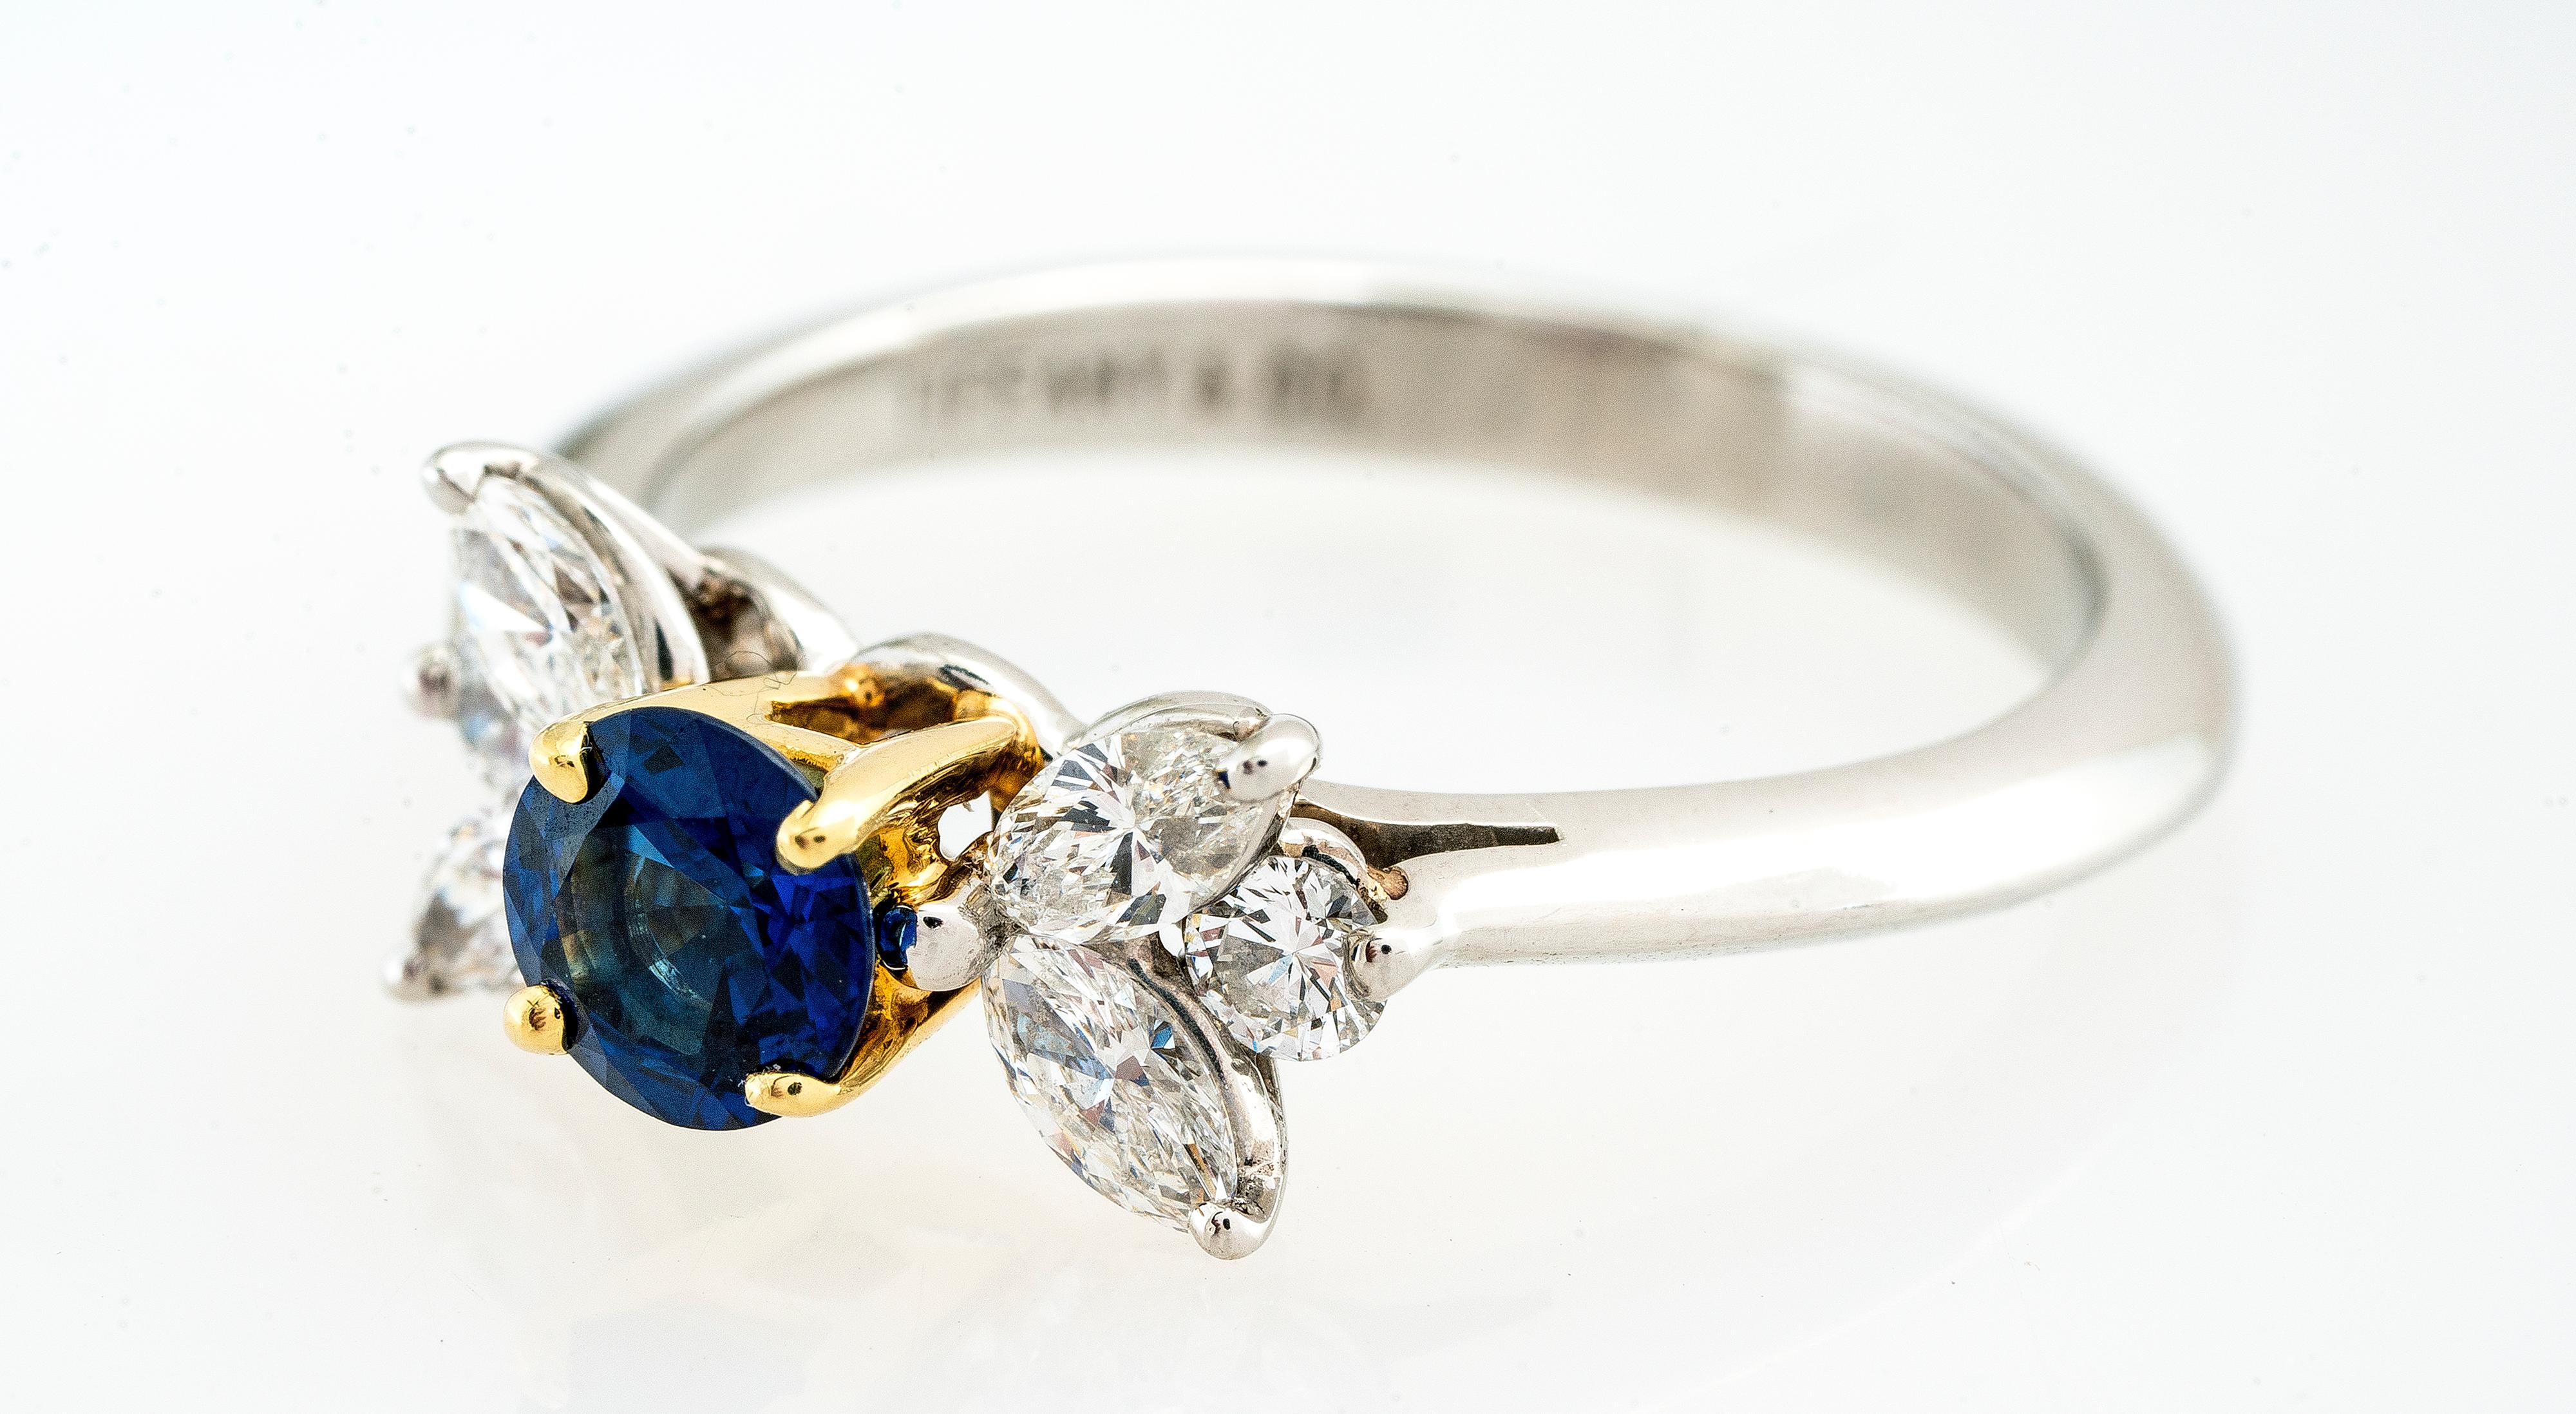 Vintage Tiffany & Co platinum & 18ky blue sapphire and diamond ring from the Victoria collection.  The round blue sapphire weight approximately 0.50 carats (5.16mm) and is prong set in 18k yellow gold.  There are 
four marquise diamonds and two